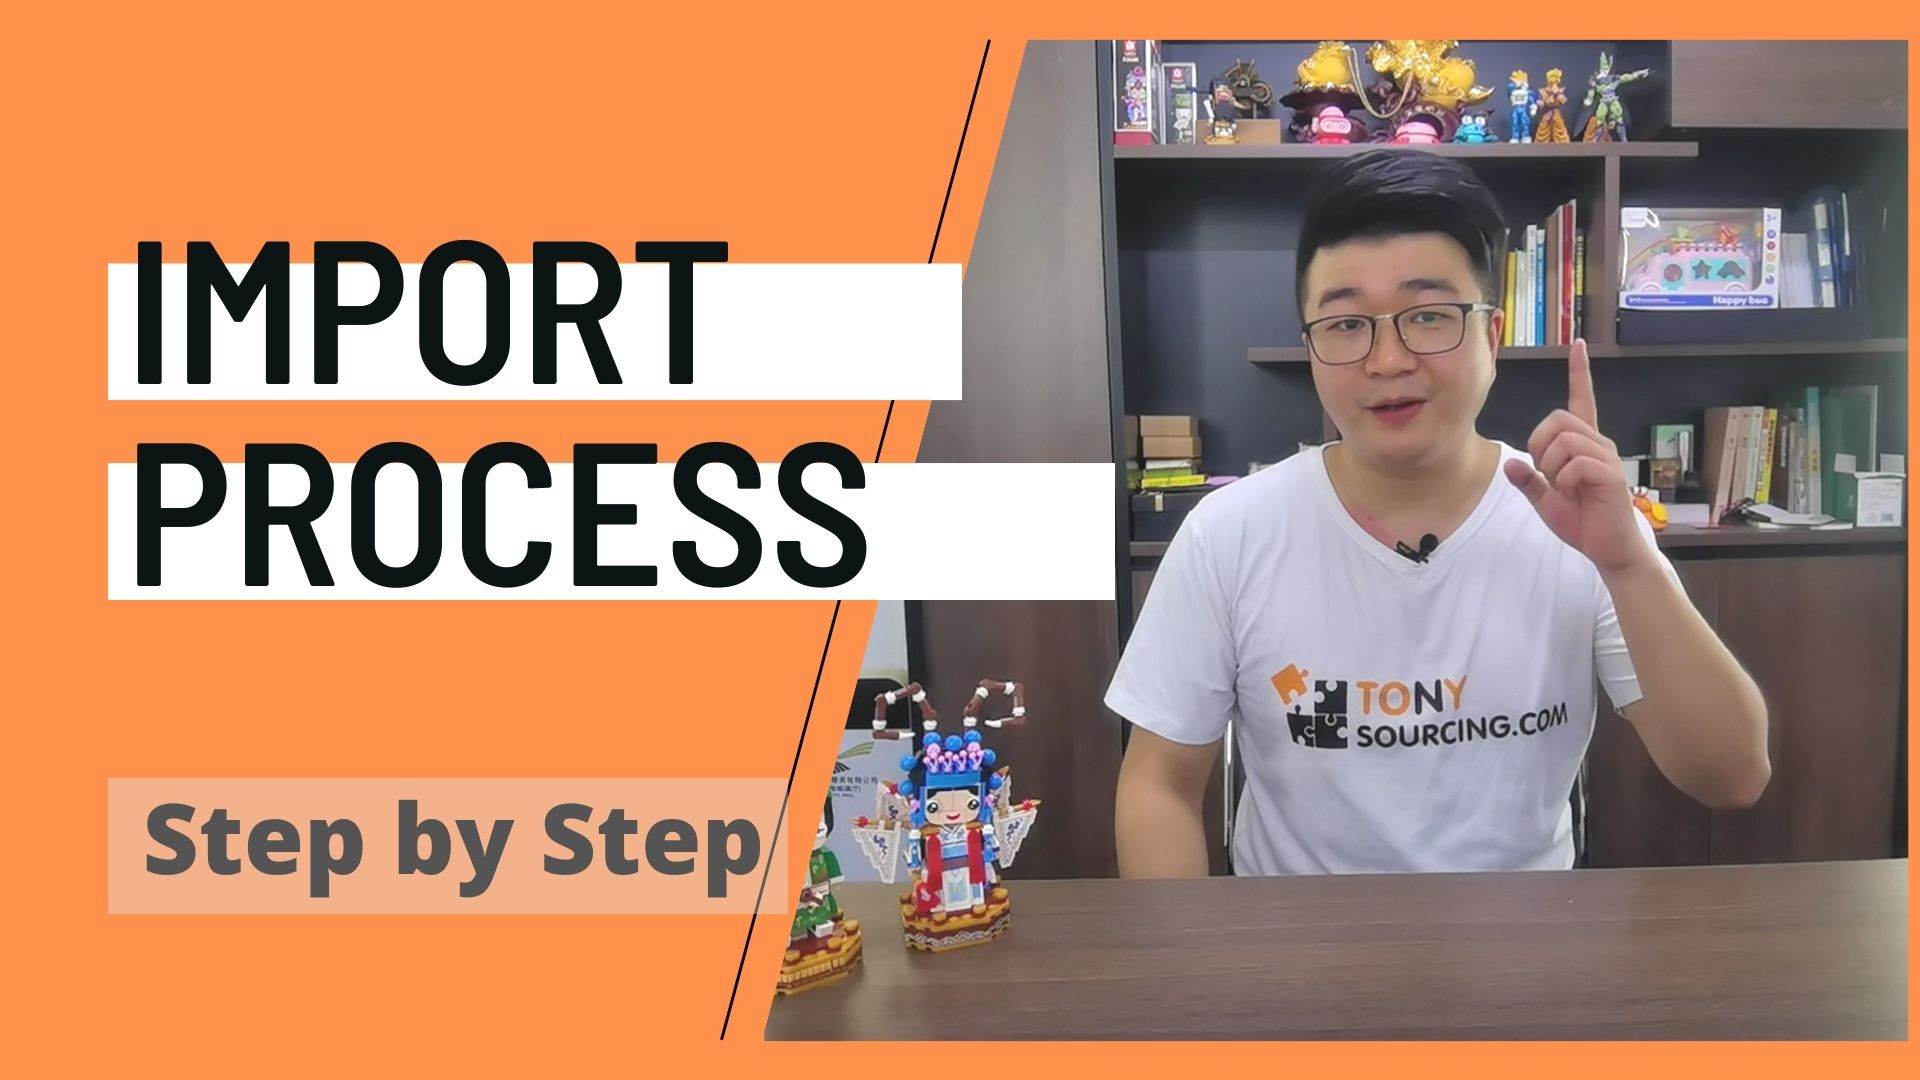 IMPORT PROCESS STEP BY STEP (1)